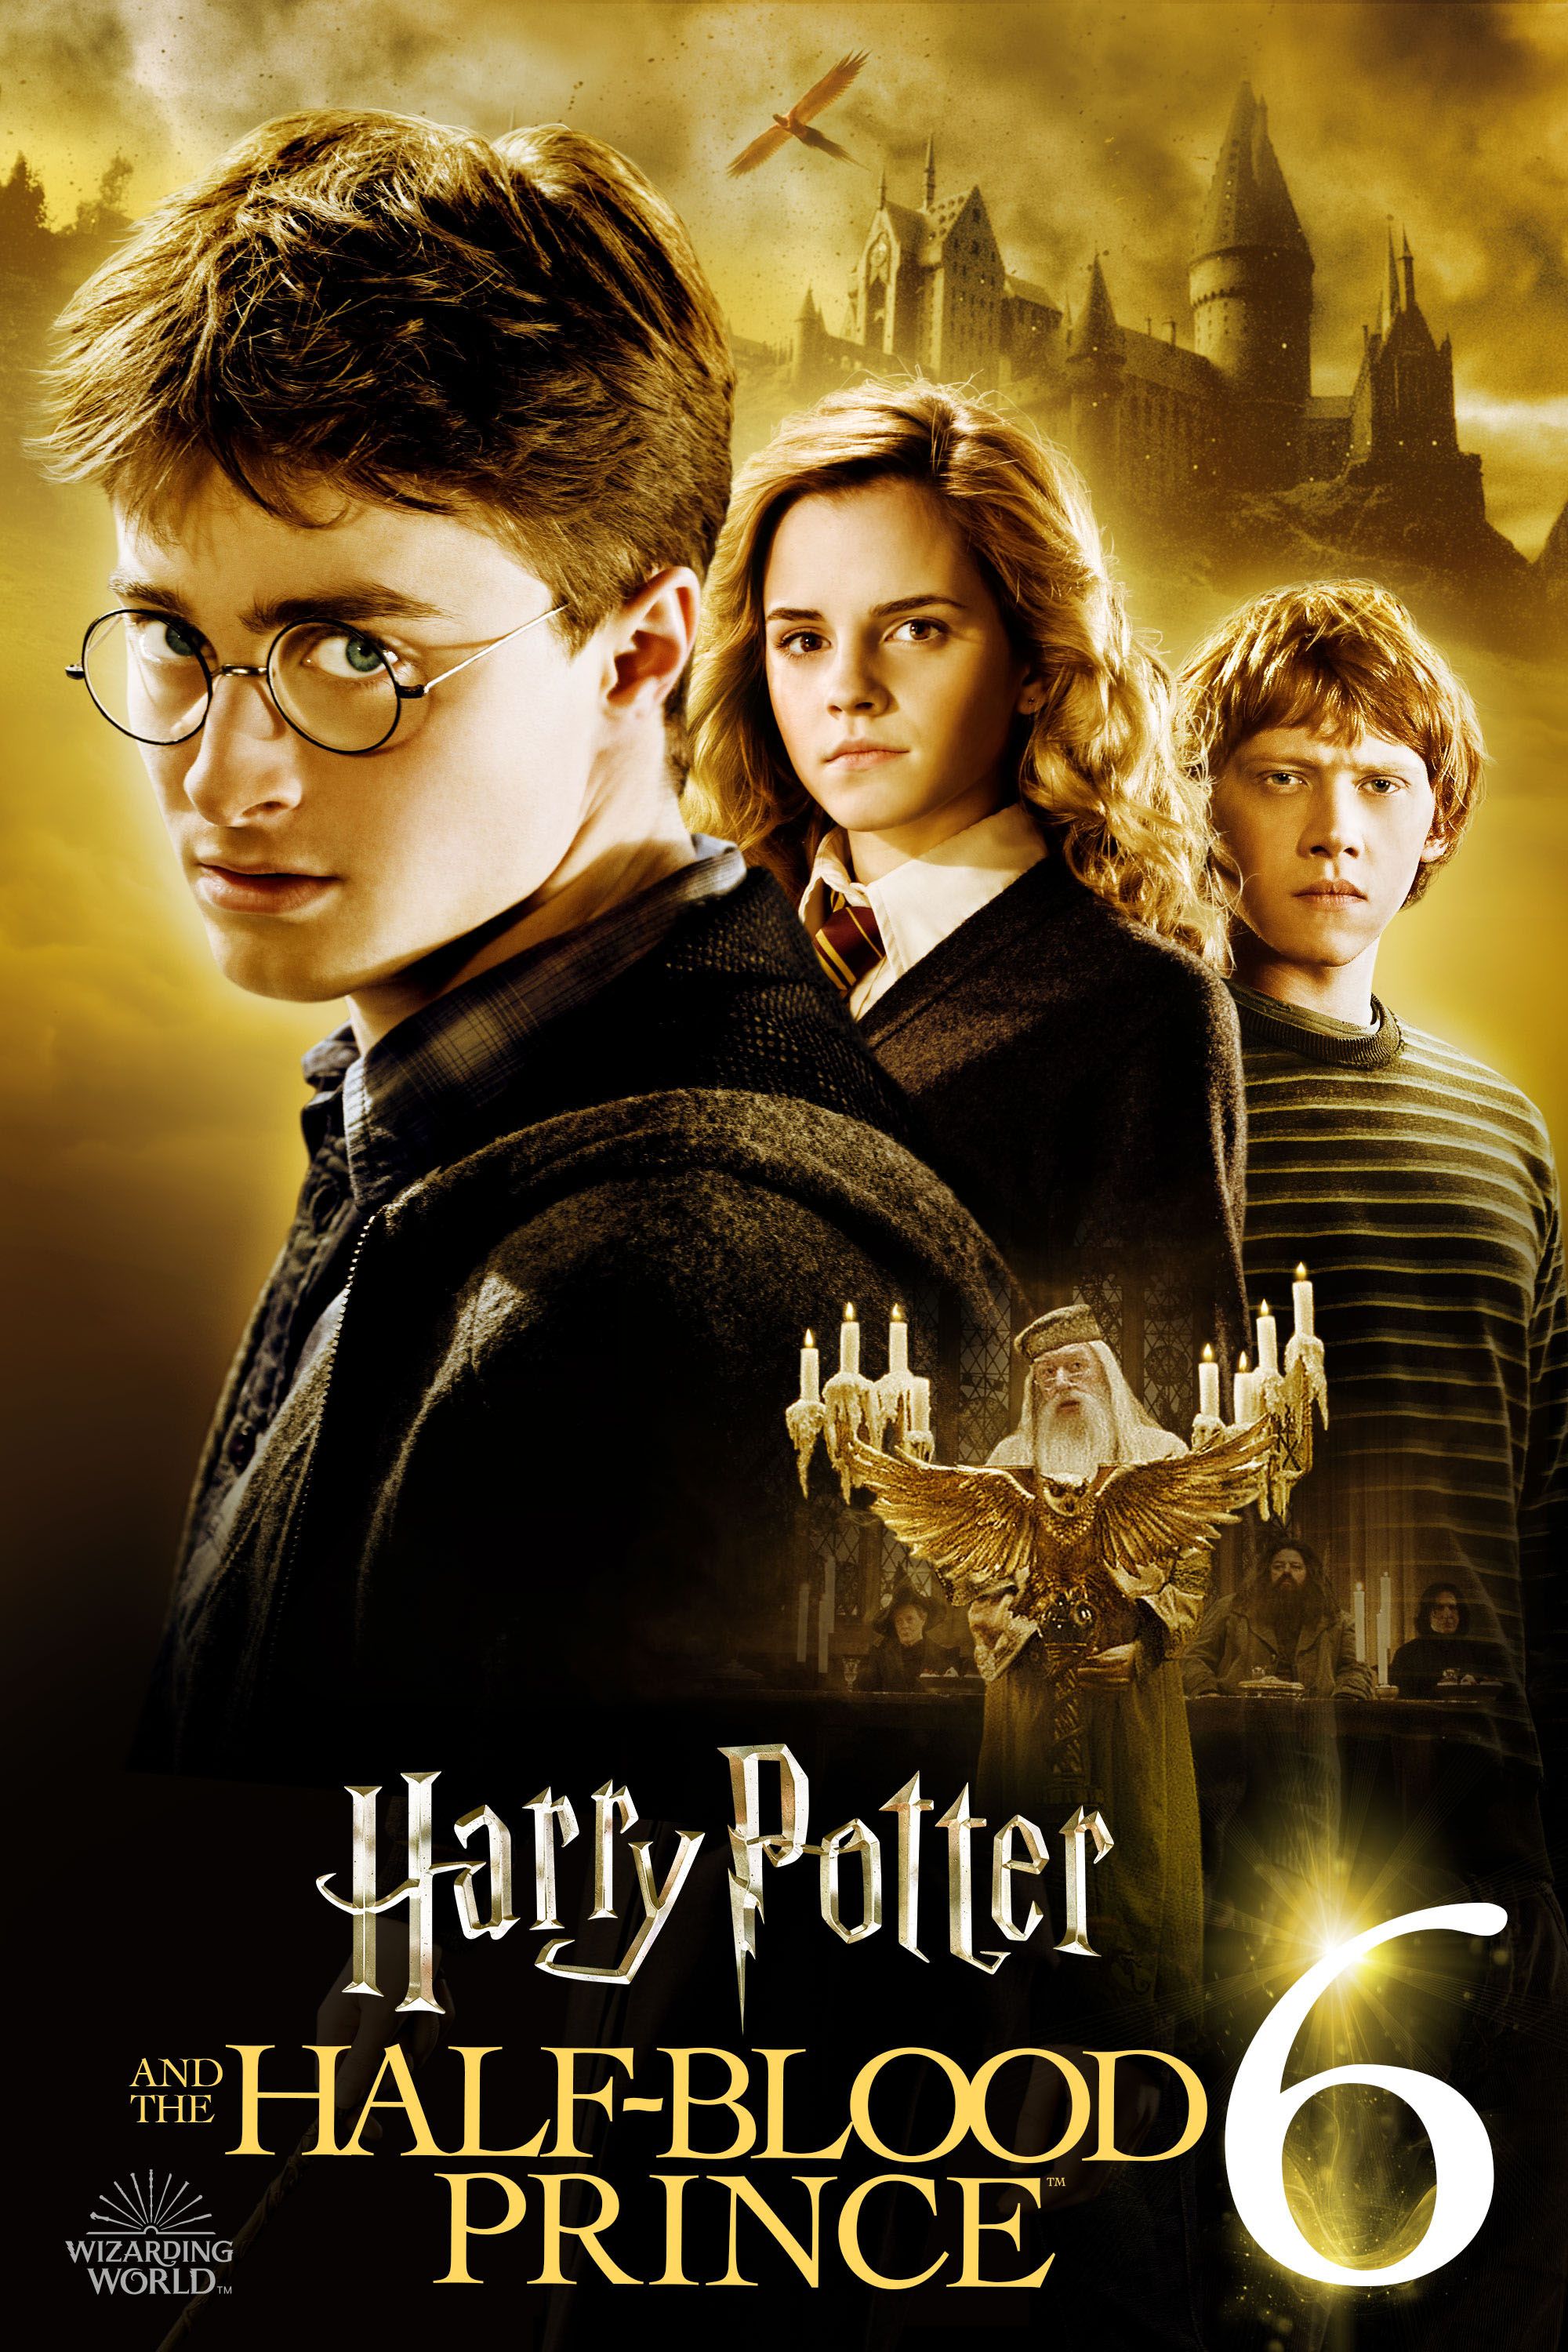 harry potter in hindi movies torrent